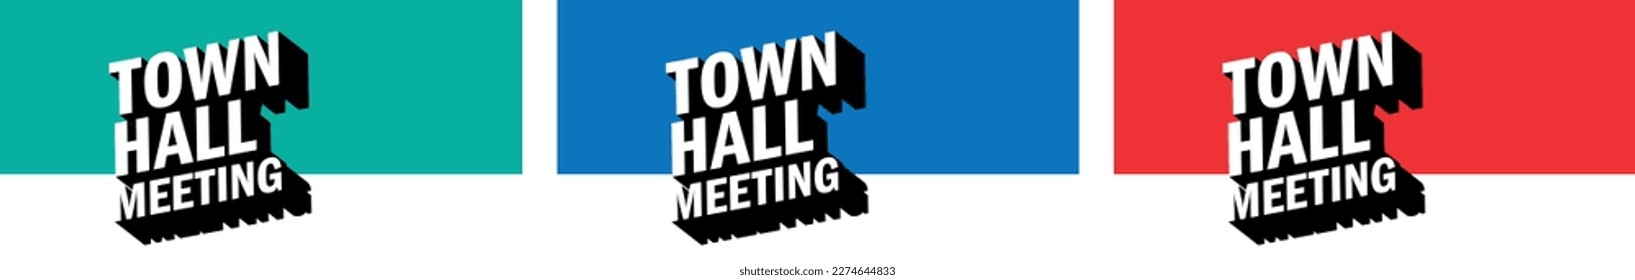 Town hall meeting on color background